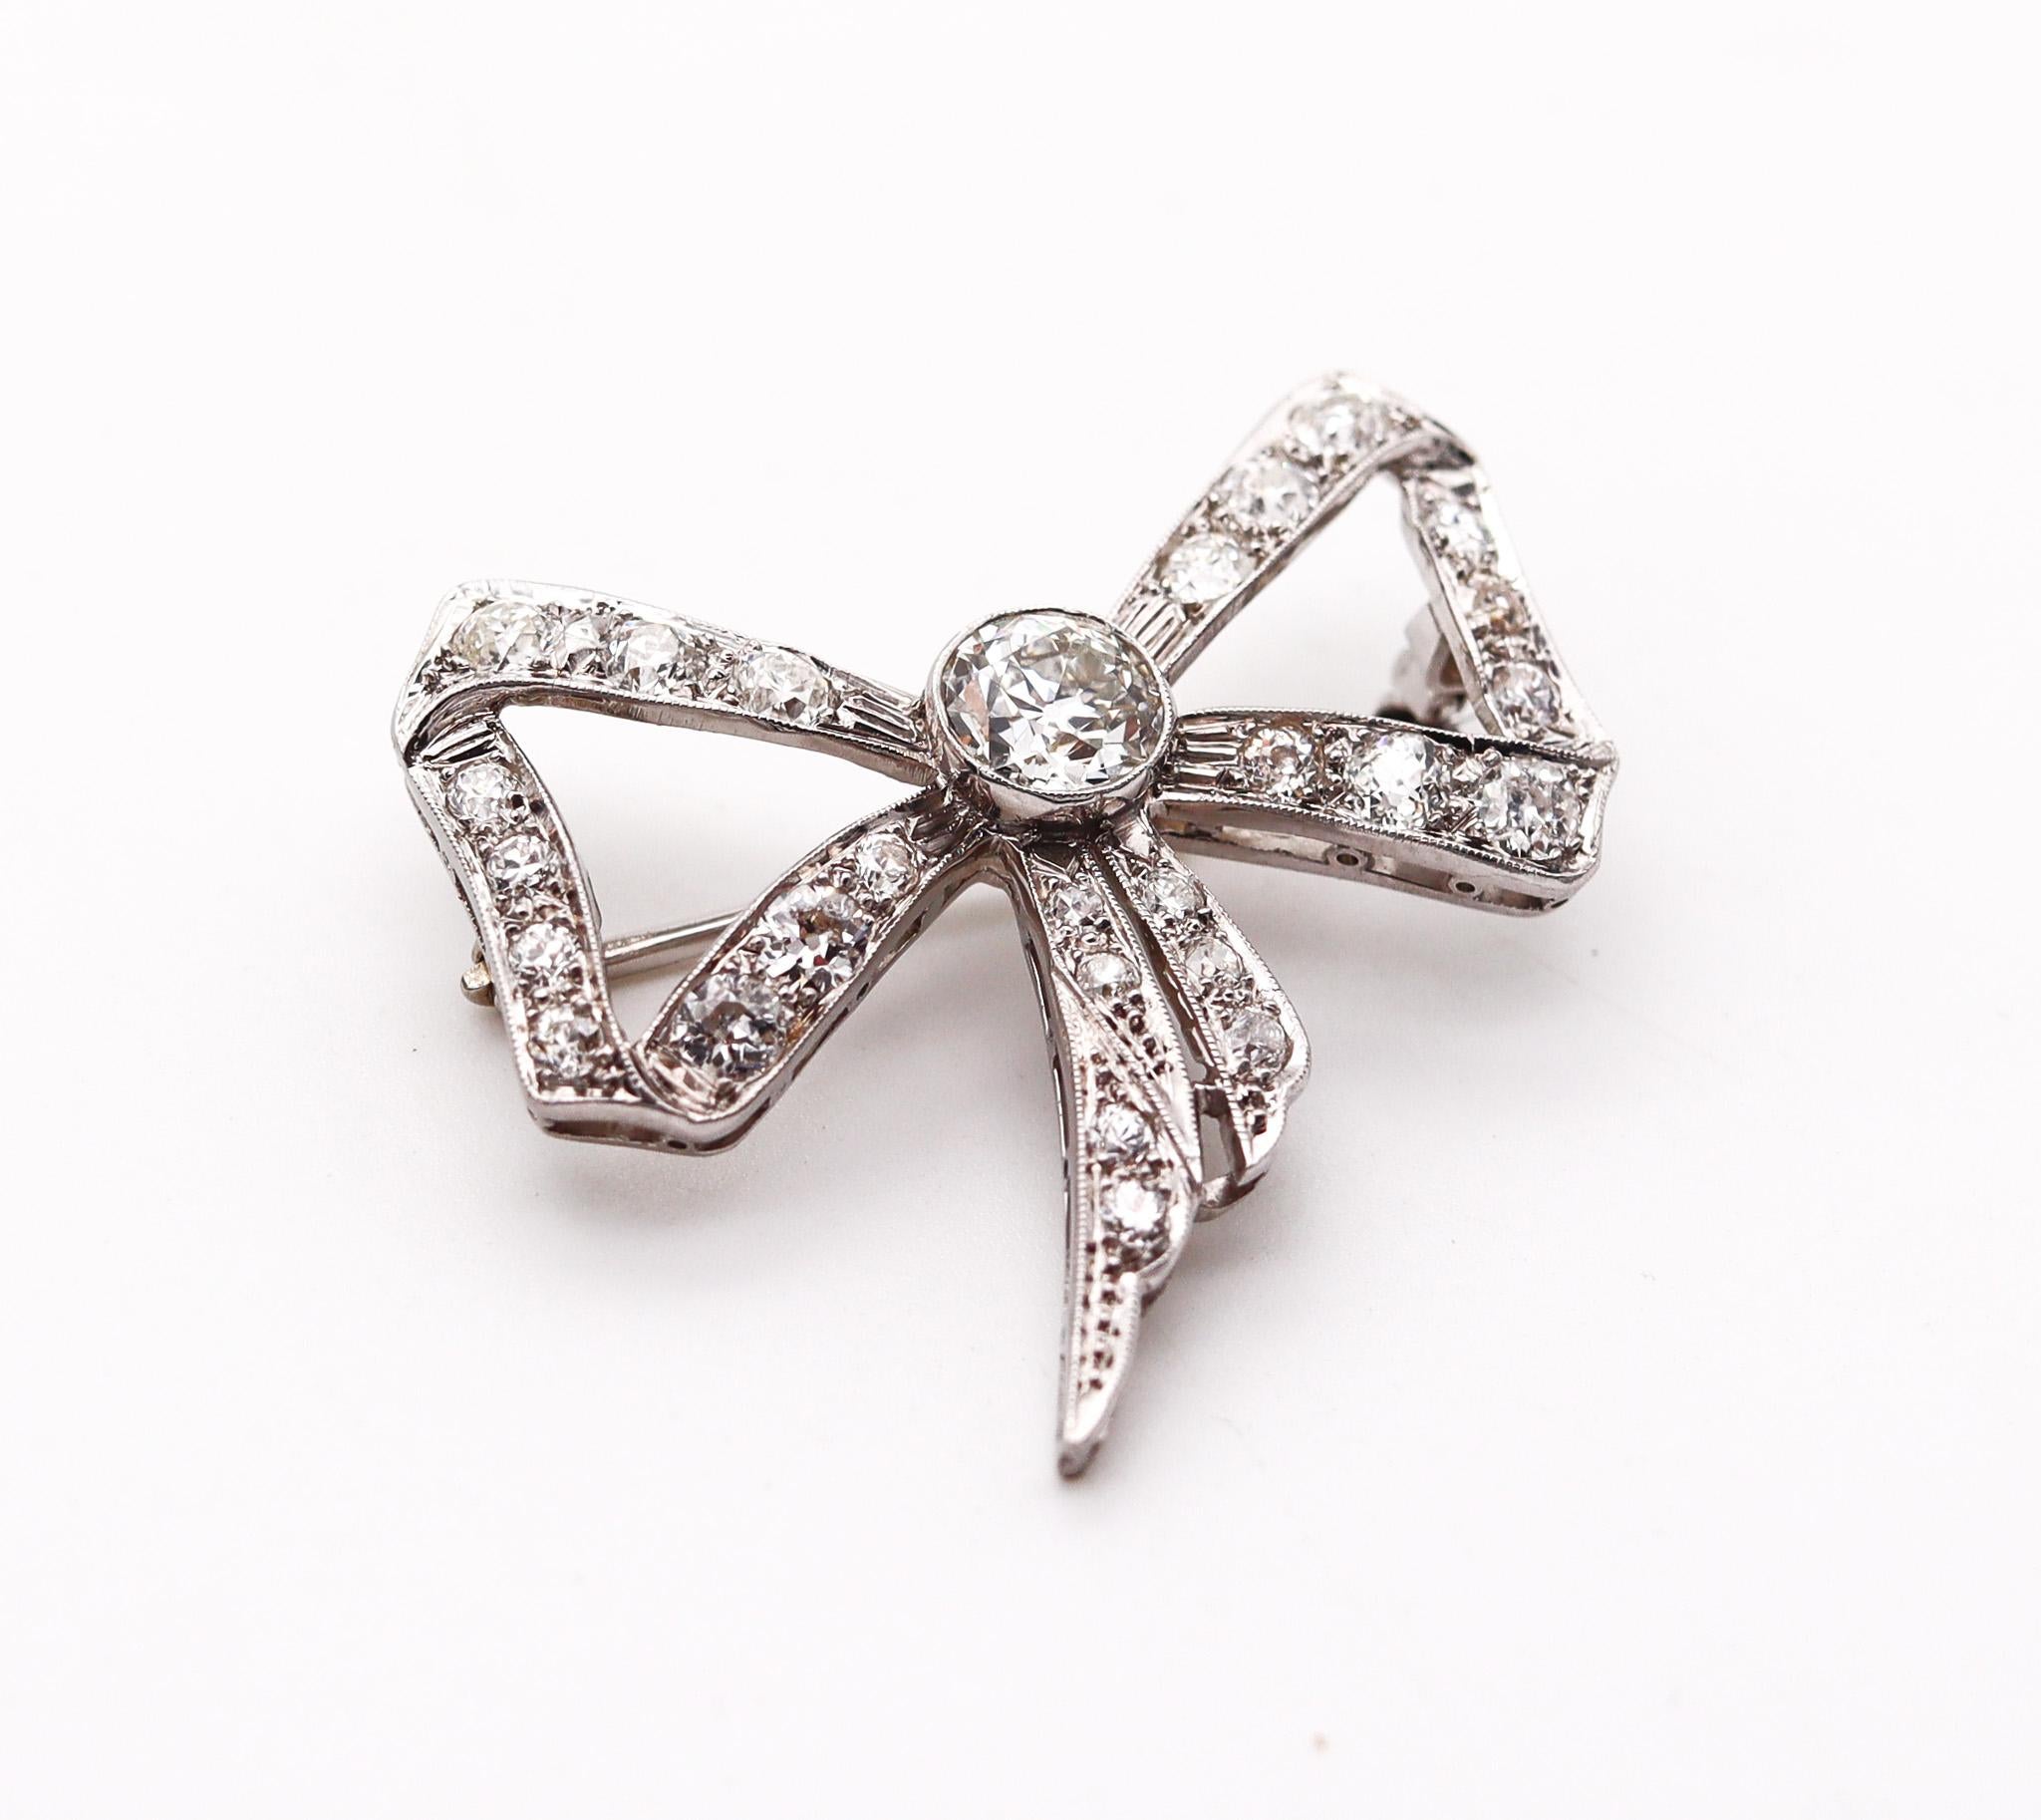 Belle Époque Edwardian 1905 Belle Epoque Bow Brooch in Platinum with 3.35 Ctw in Diamonds For Sale